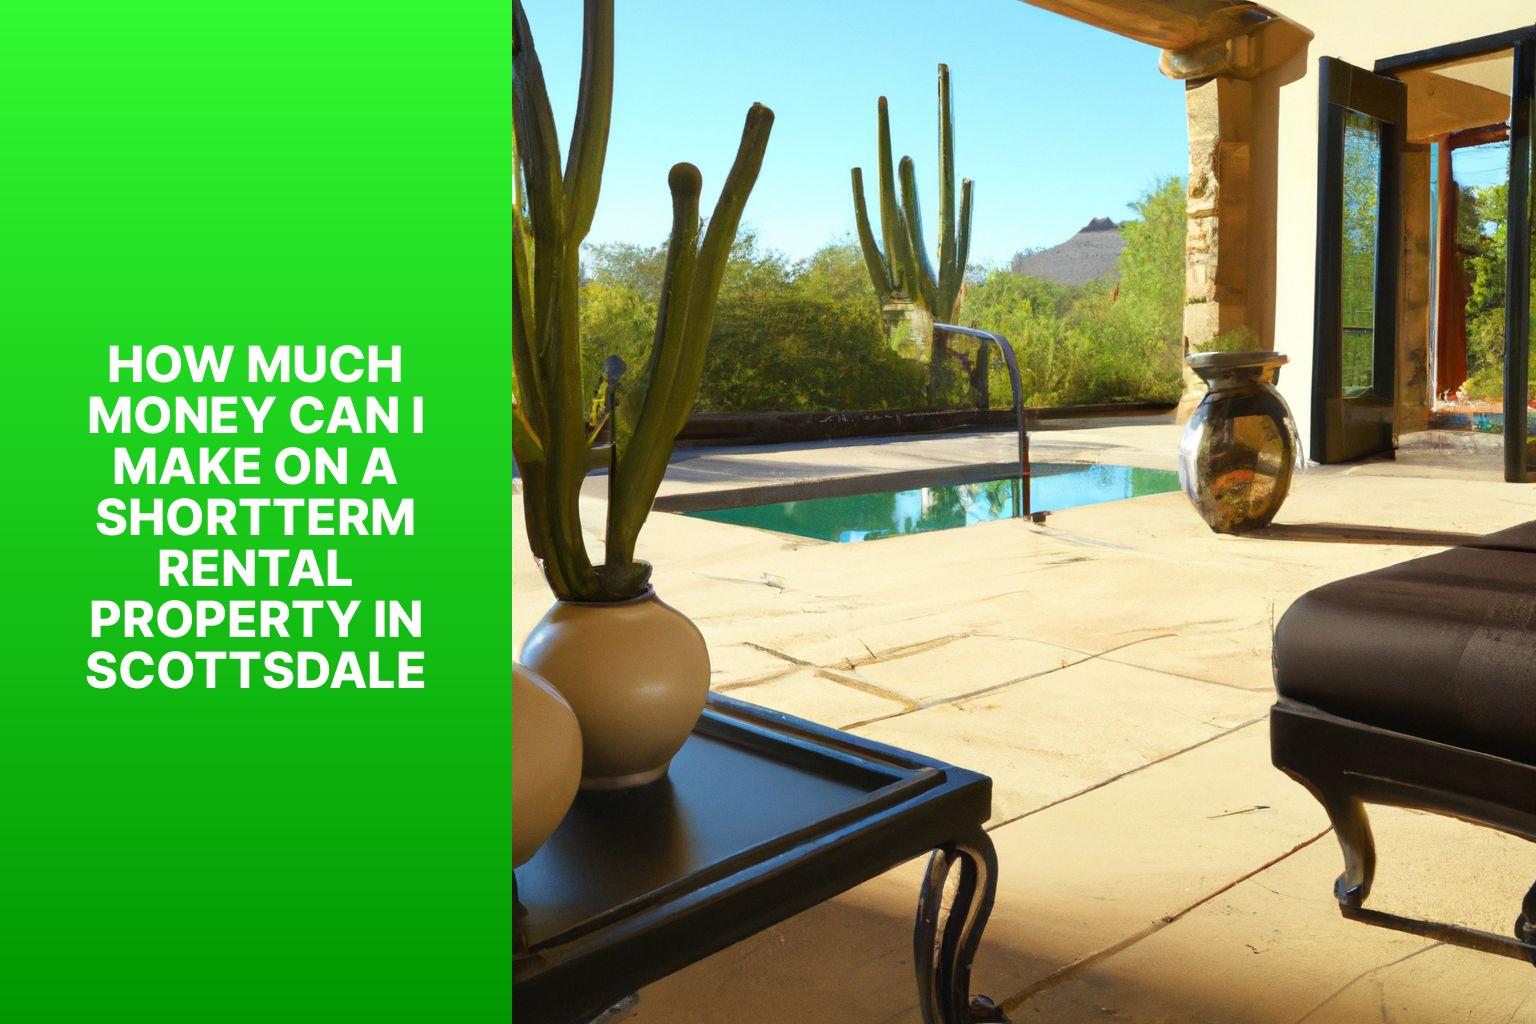 How much money can I make on a shortterm rental property in Scottsdale